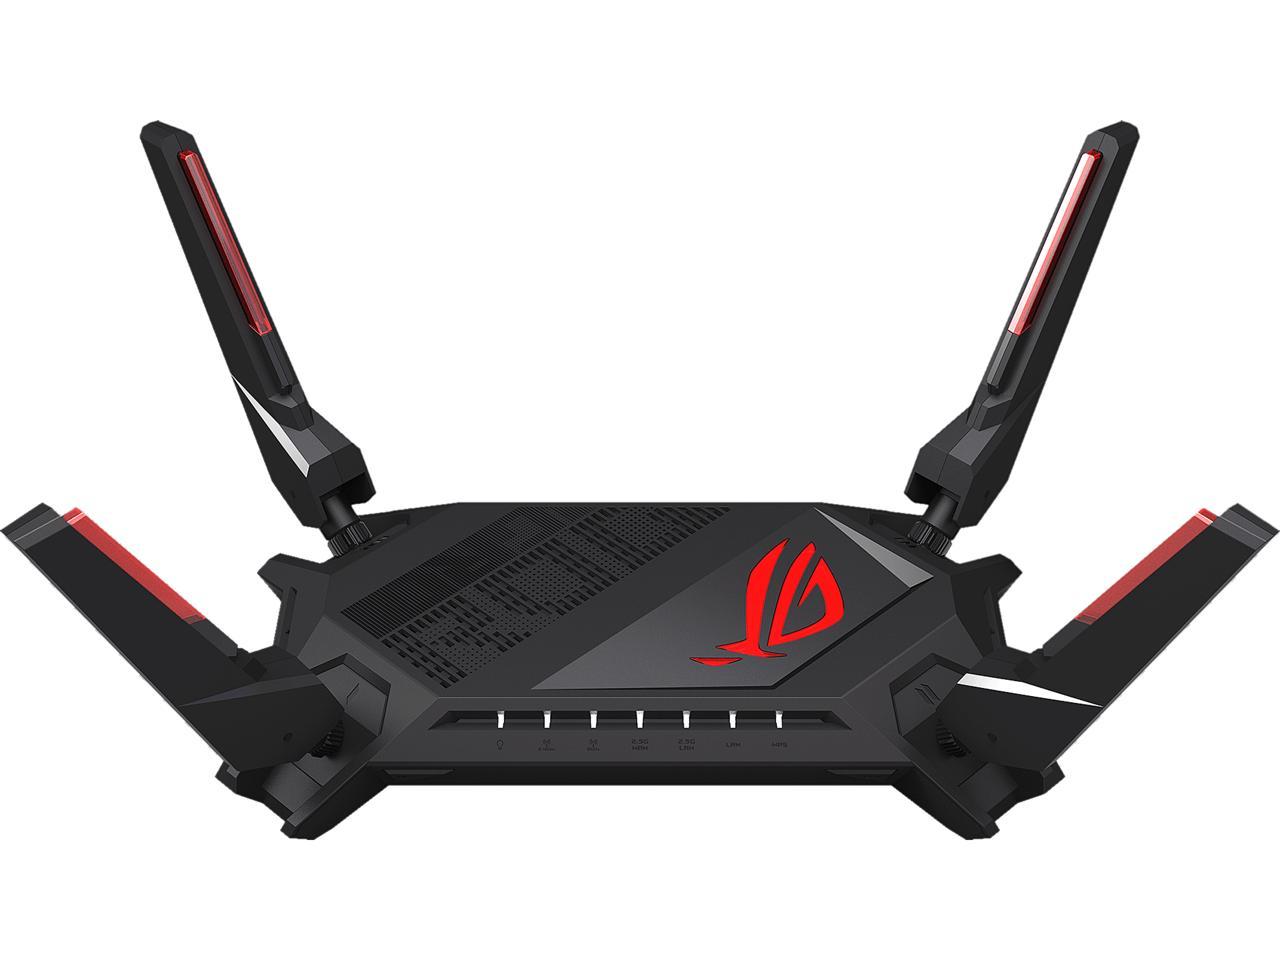 ASUS ROG Rapture GT-AX6000 Wireless Router $257